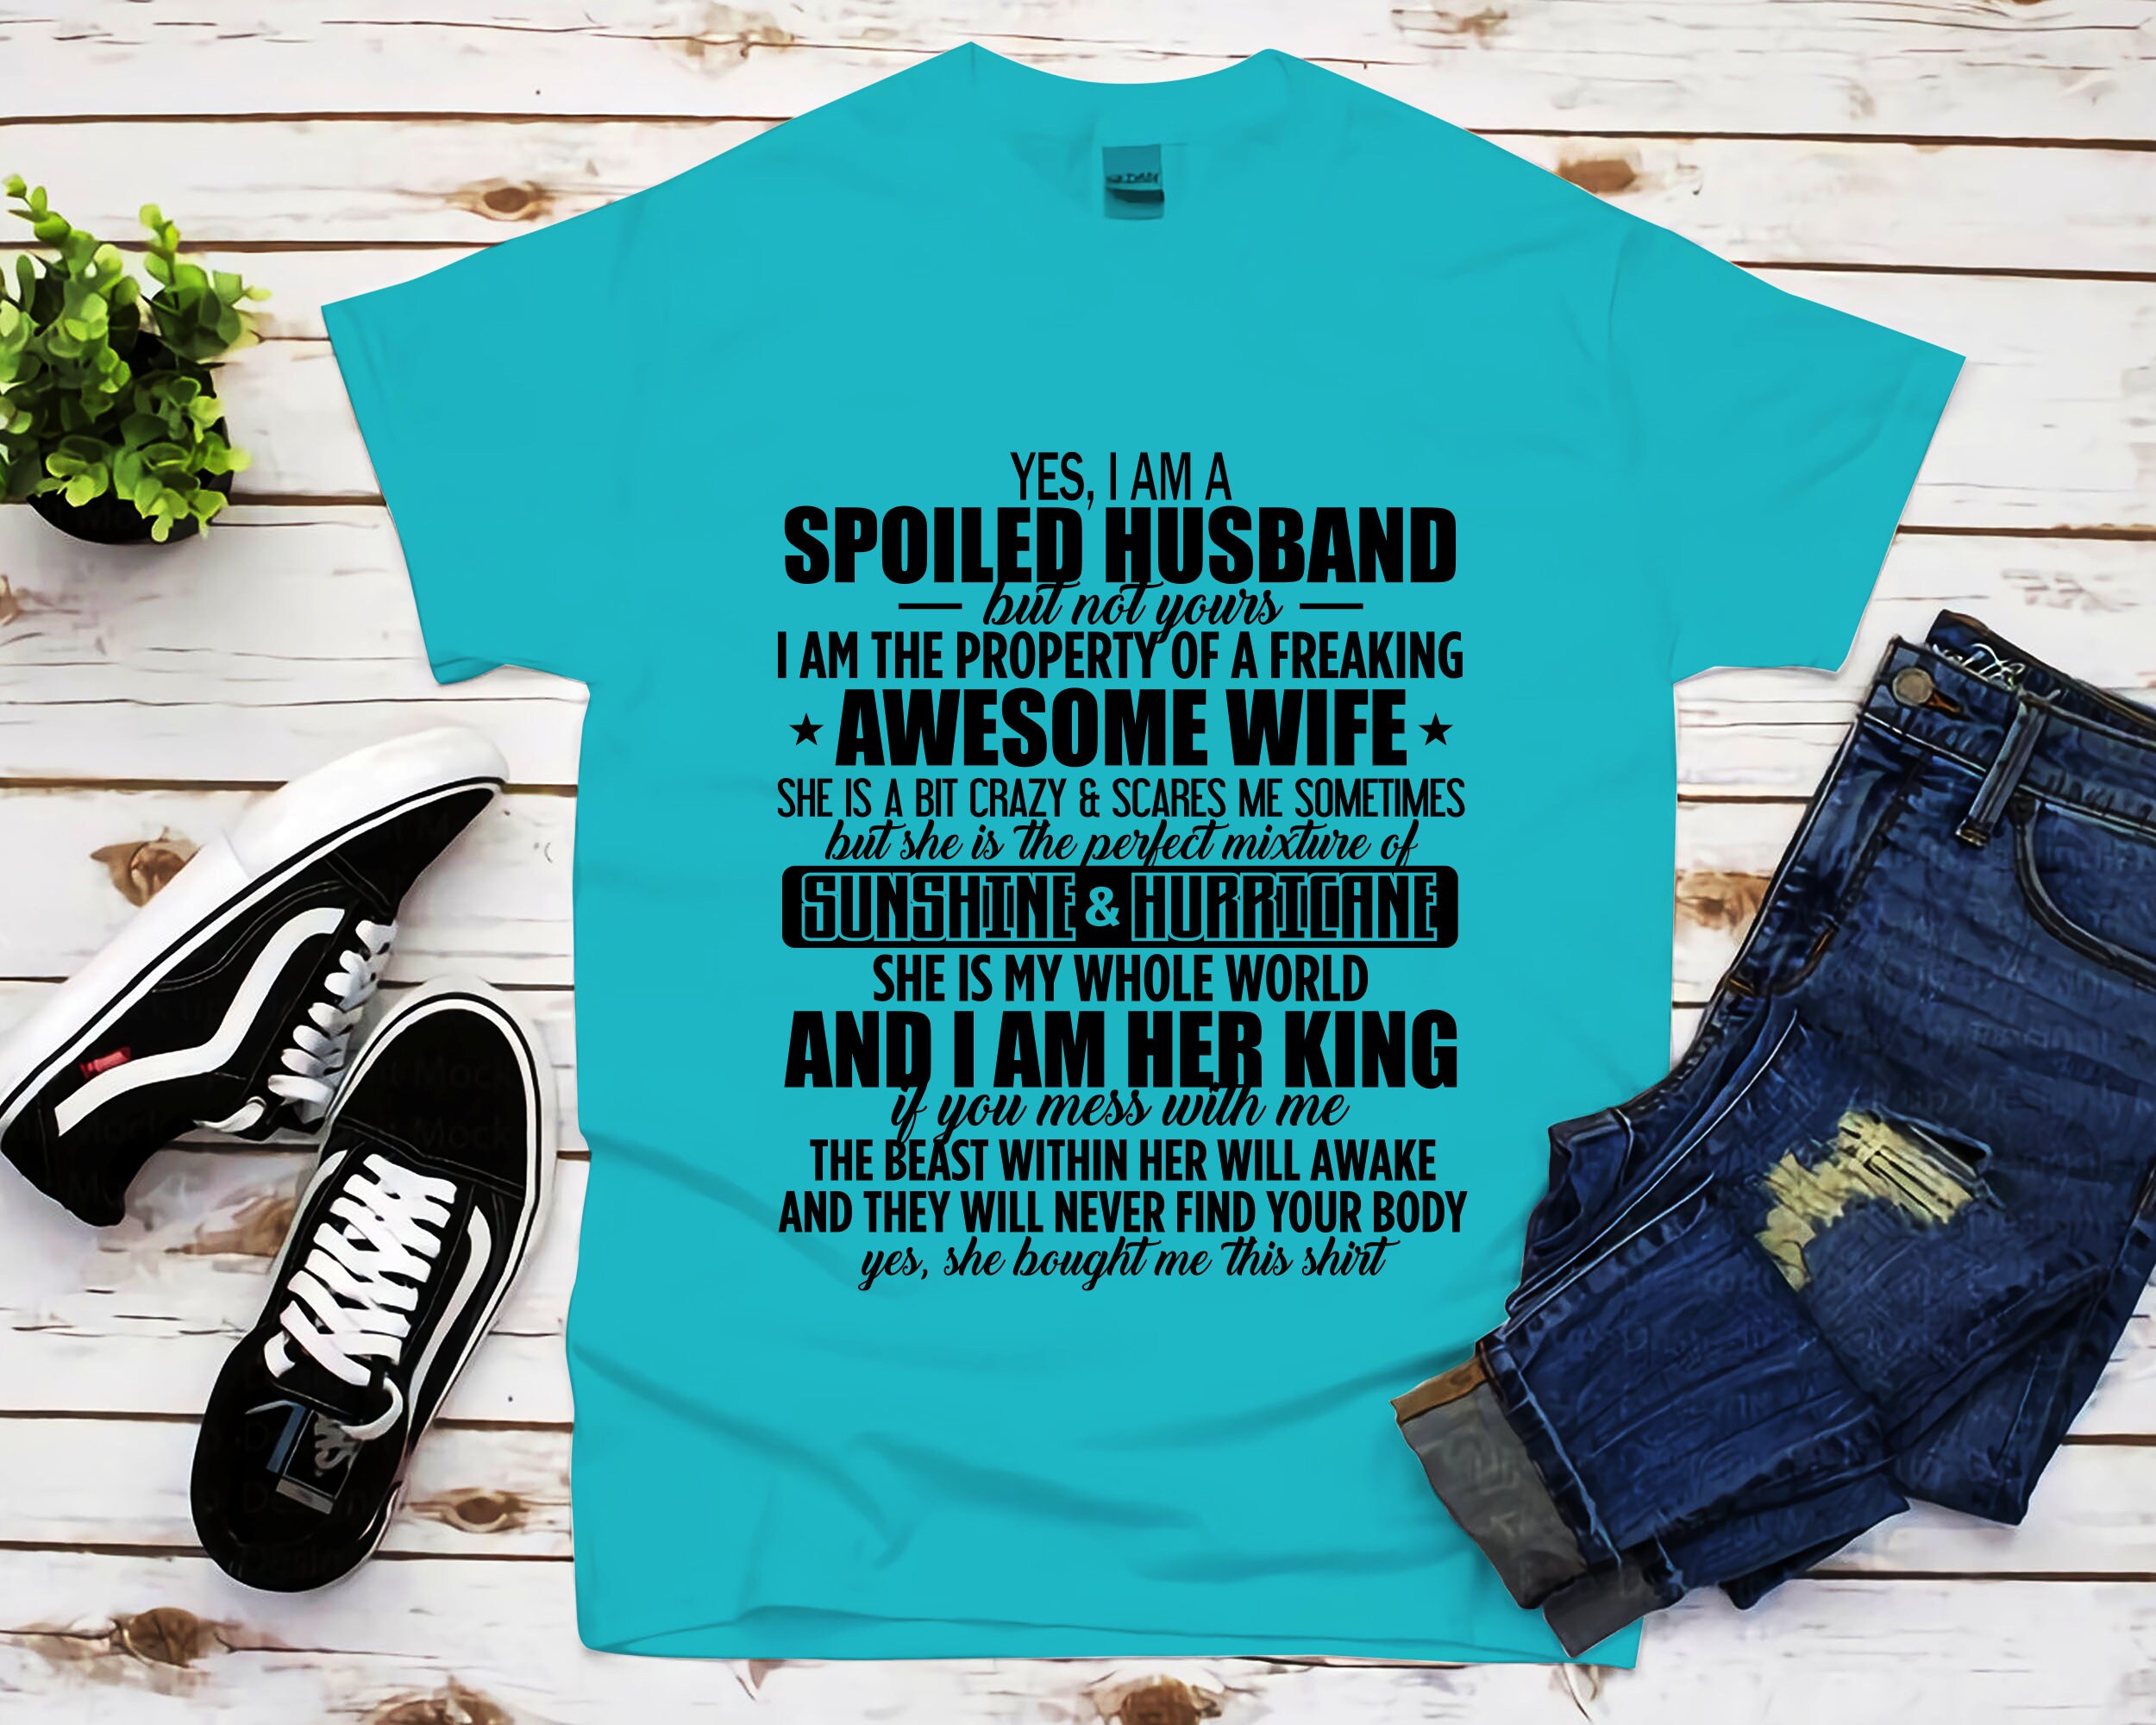 Yes I'm A Spoiled Husband of A Freaking Awesome Wife | Etsy